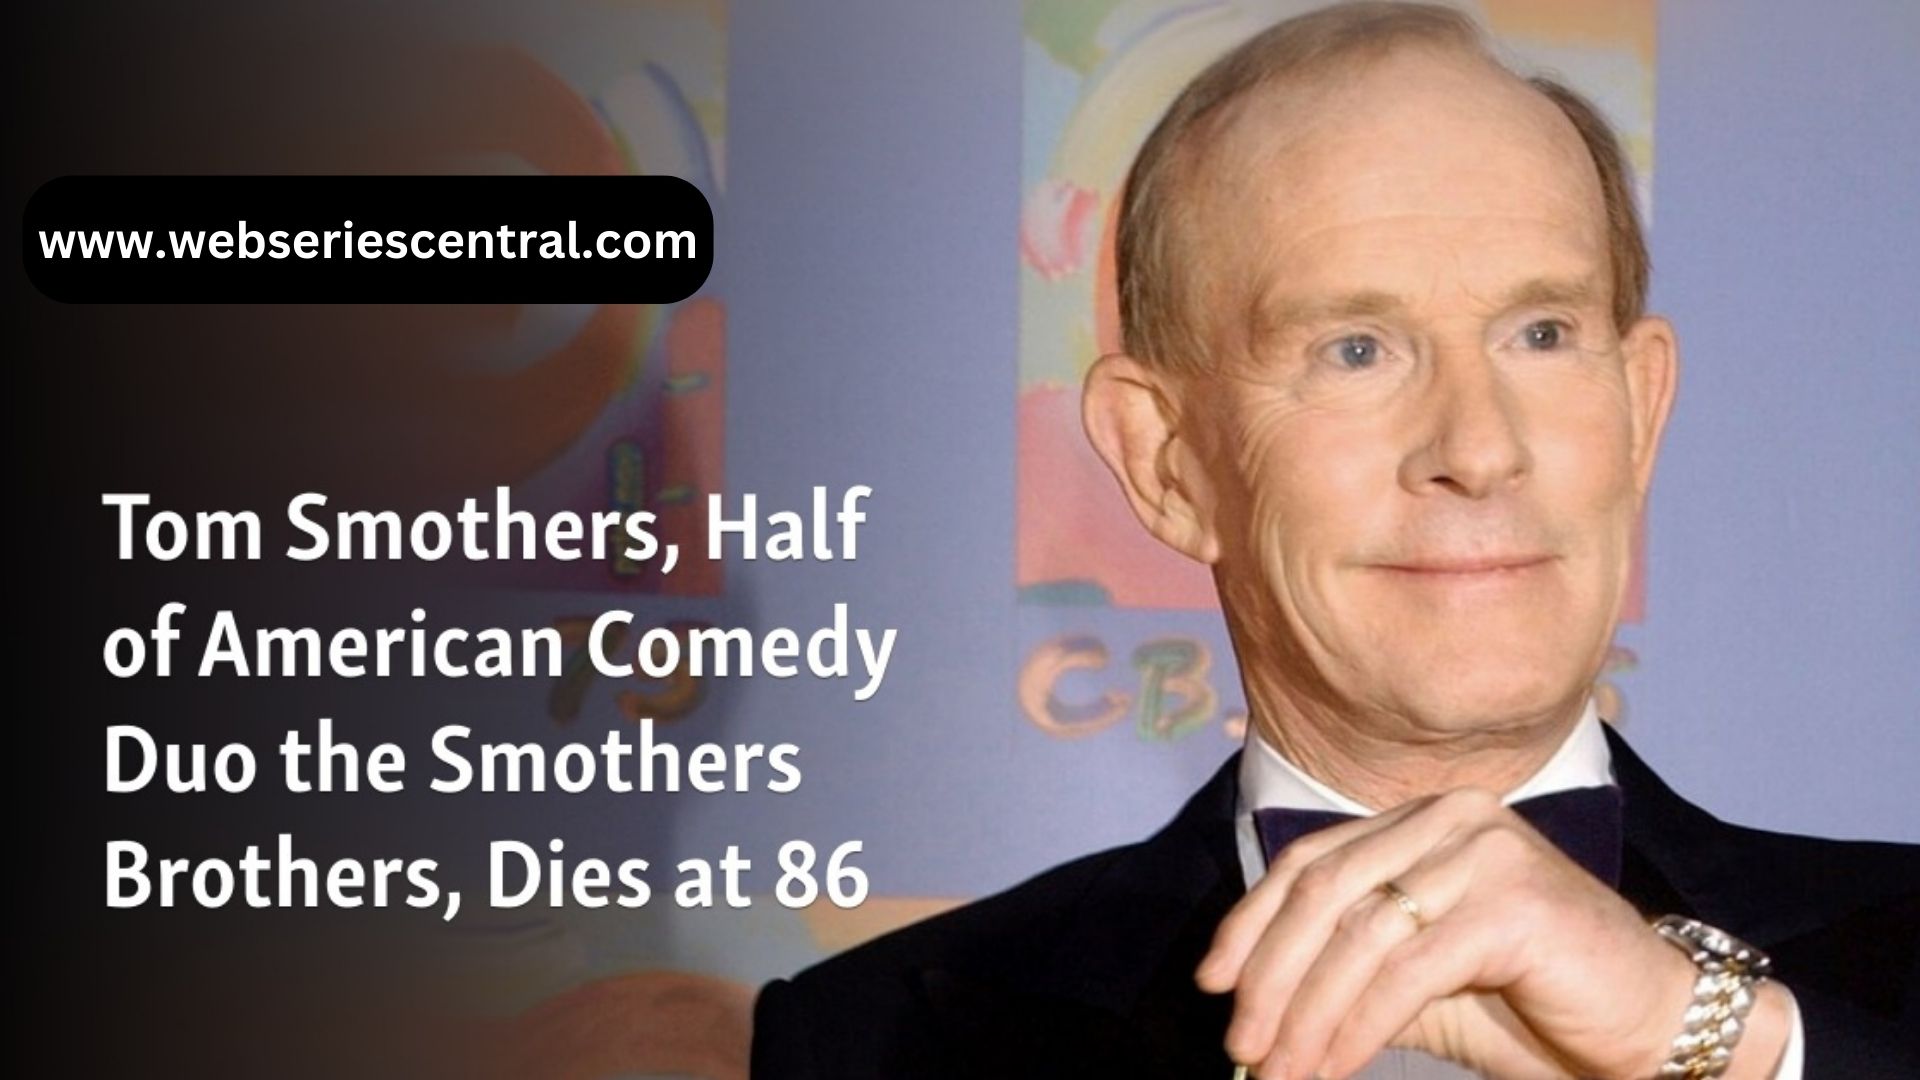 Tom Smothers Smothers Brothers Comedy Duo Television Satire Boundary-pushing CBS Variety Show Satirical Television Counterculture Folk Singers Creative Partnership Network Censors Pop Culture Political Satire Pete Seeger John Lennon Collaboration Freedom of Speech Entertainment Legacy Cultural Impact The Smothers Brothers Comedy Hour Legacy in Comedy